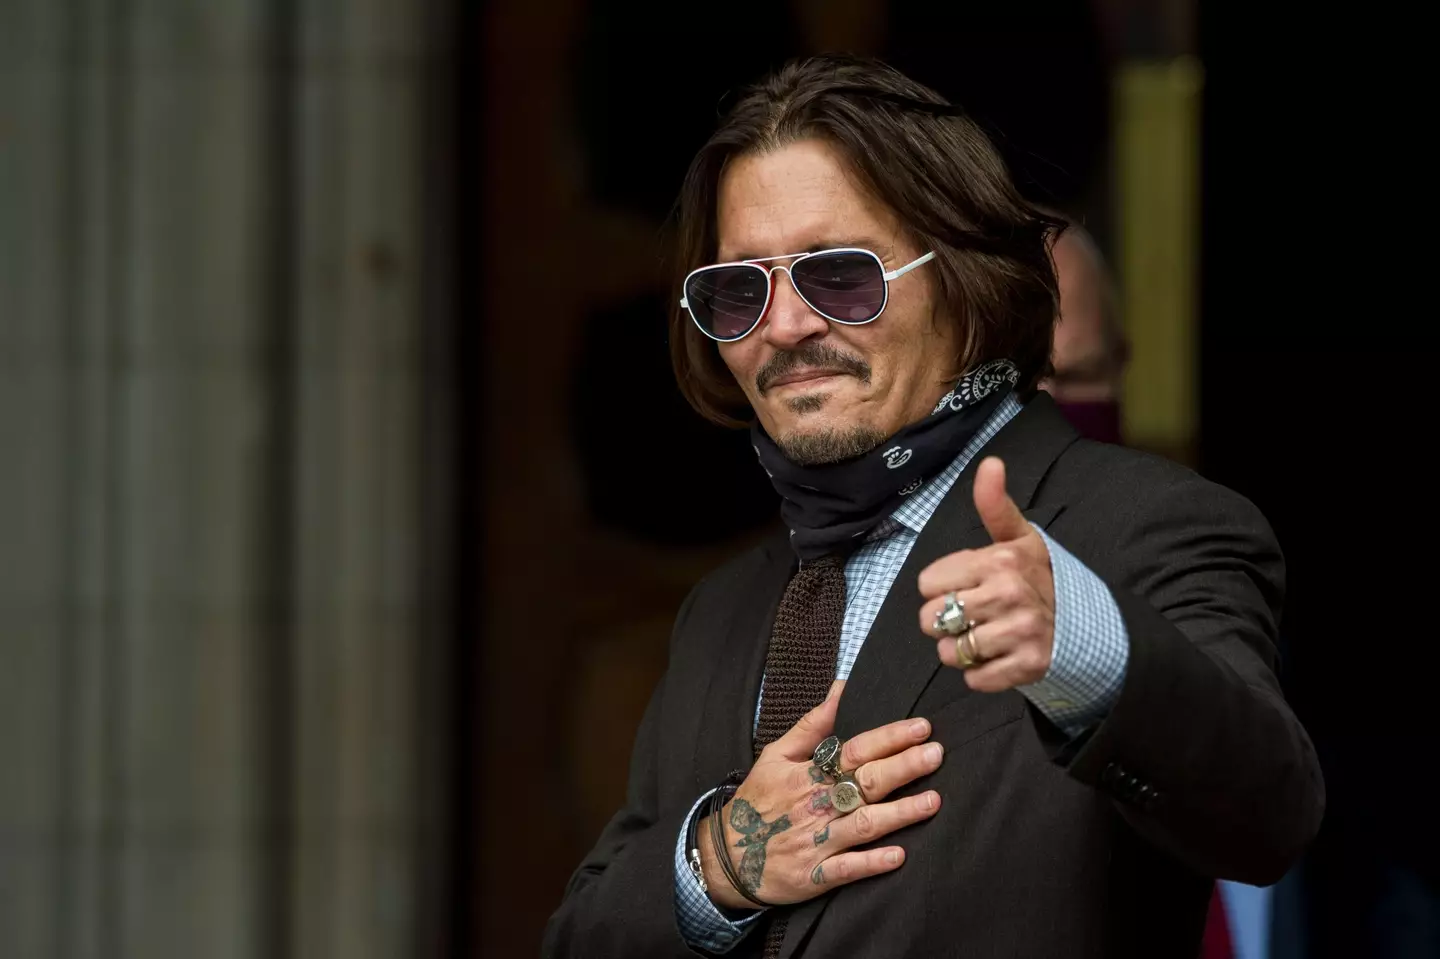 Johnny Depp may end up back in court if the appeal goes through.